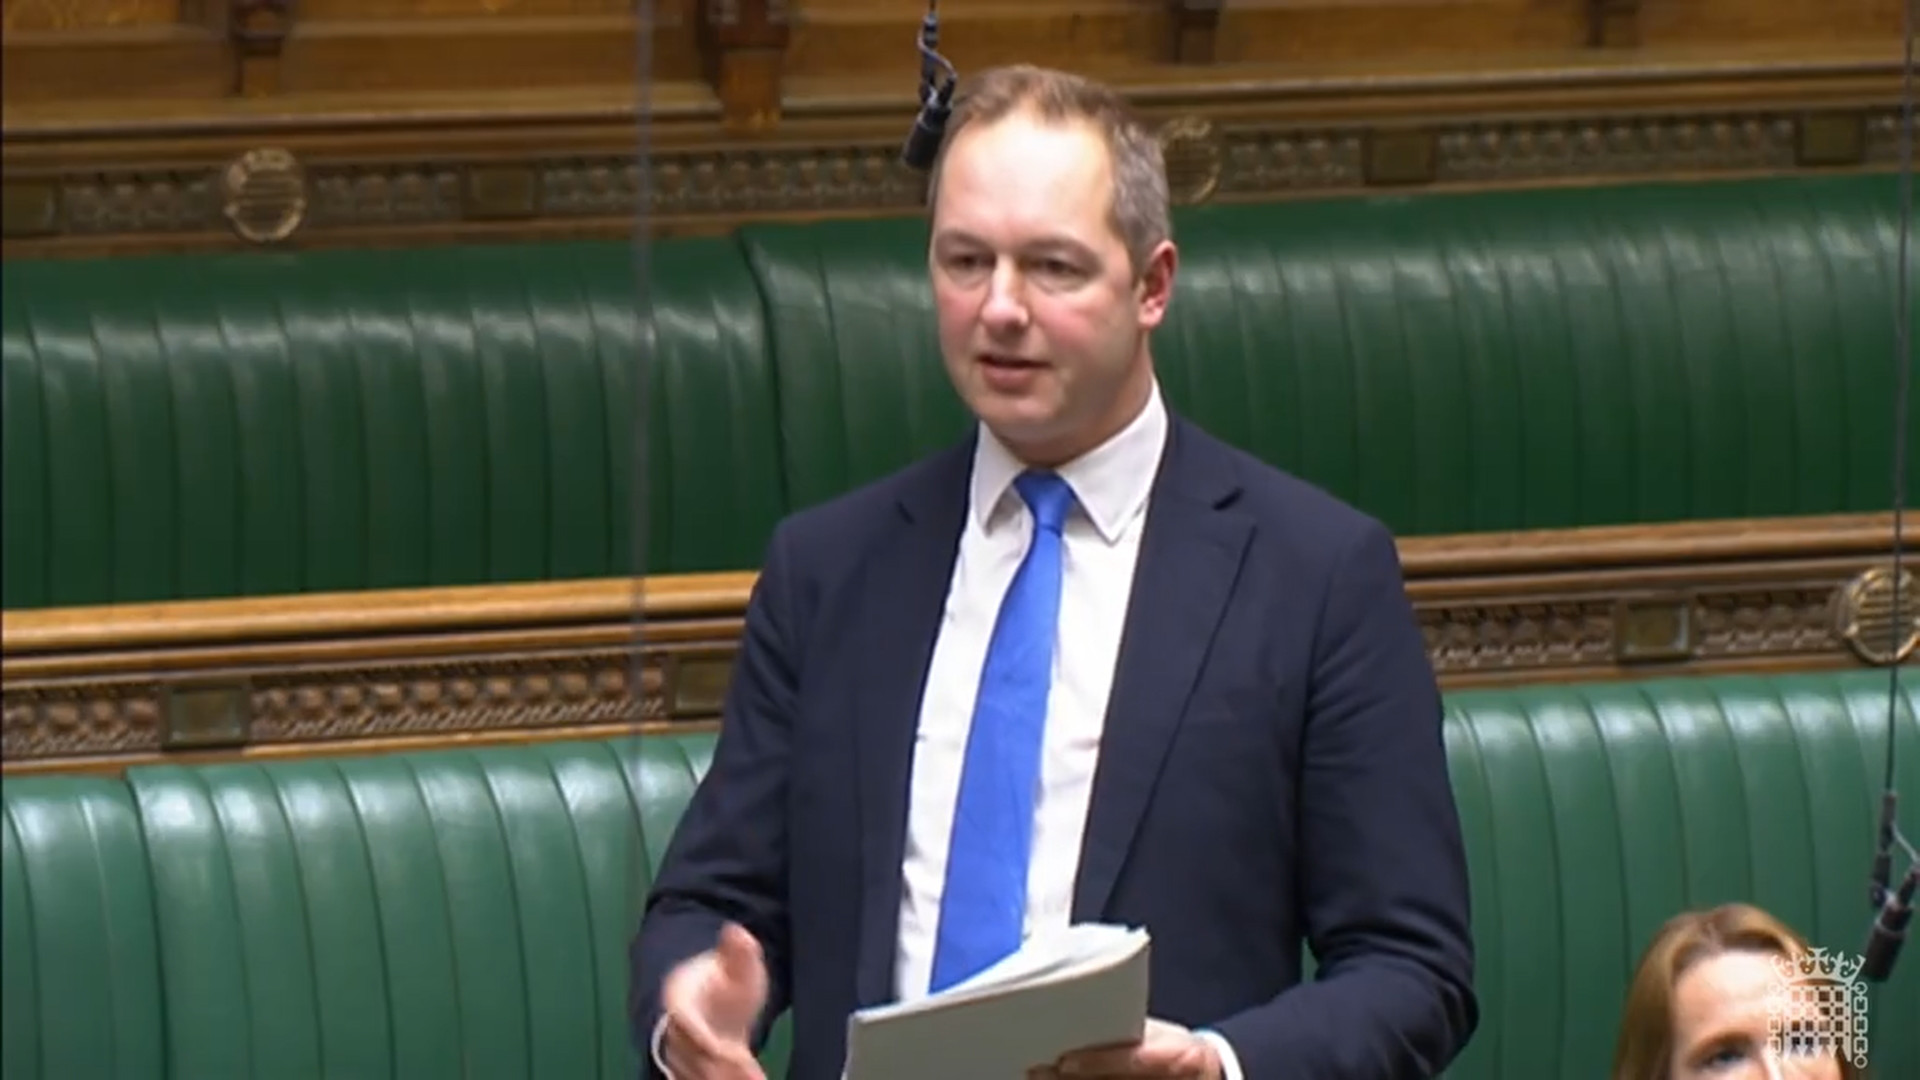 Liberal Democrat MP Richard Foord as he called for the hospital to be given the £20 million it needs to make the important repairs to keep patients safe